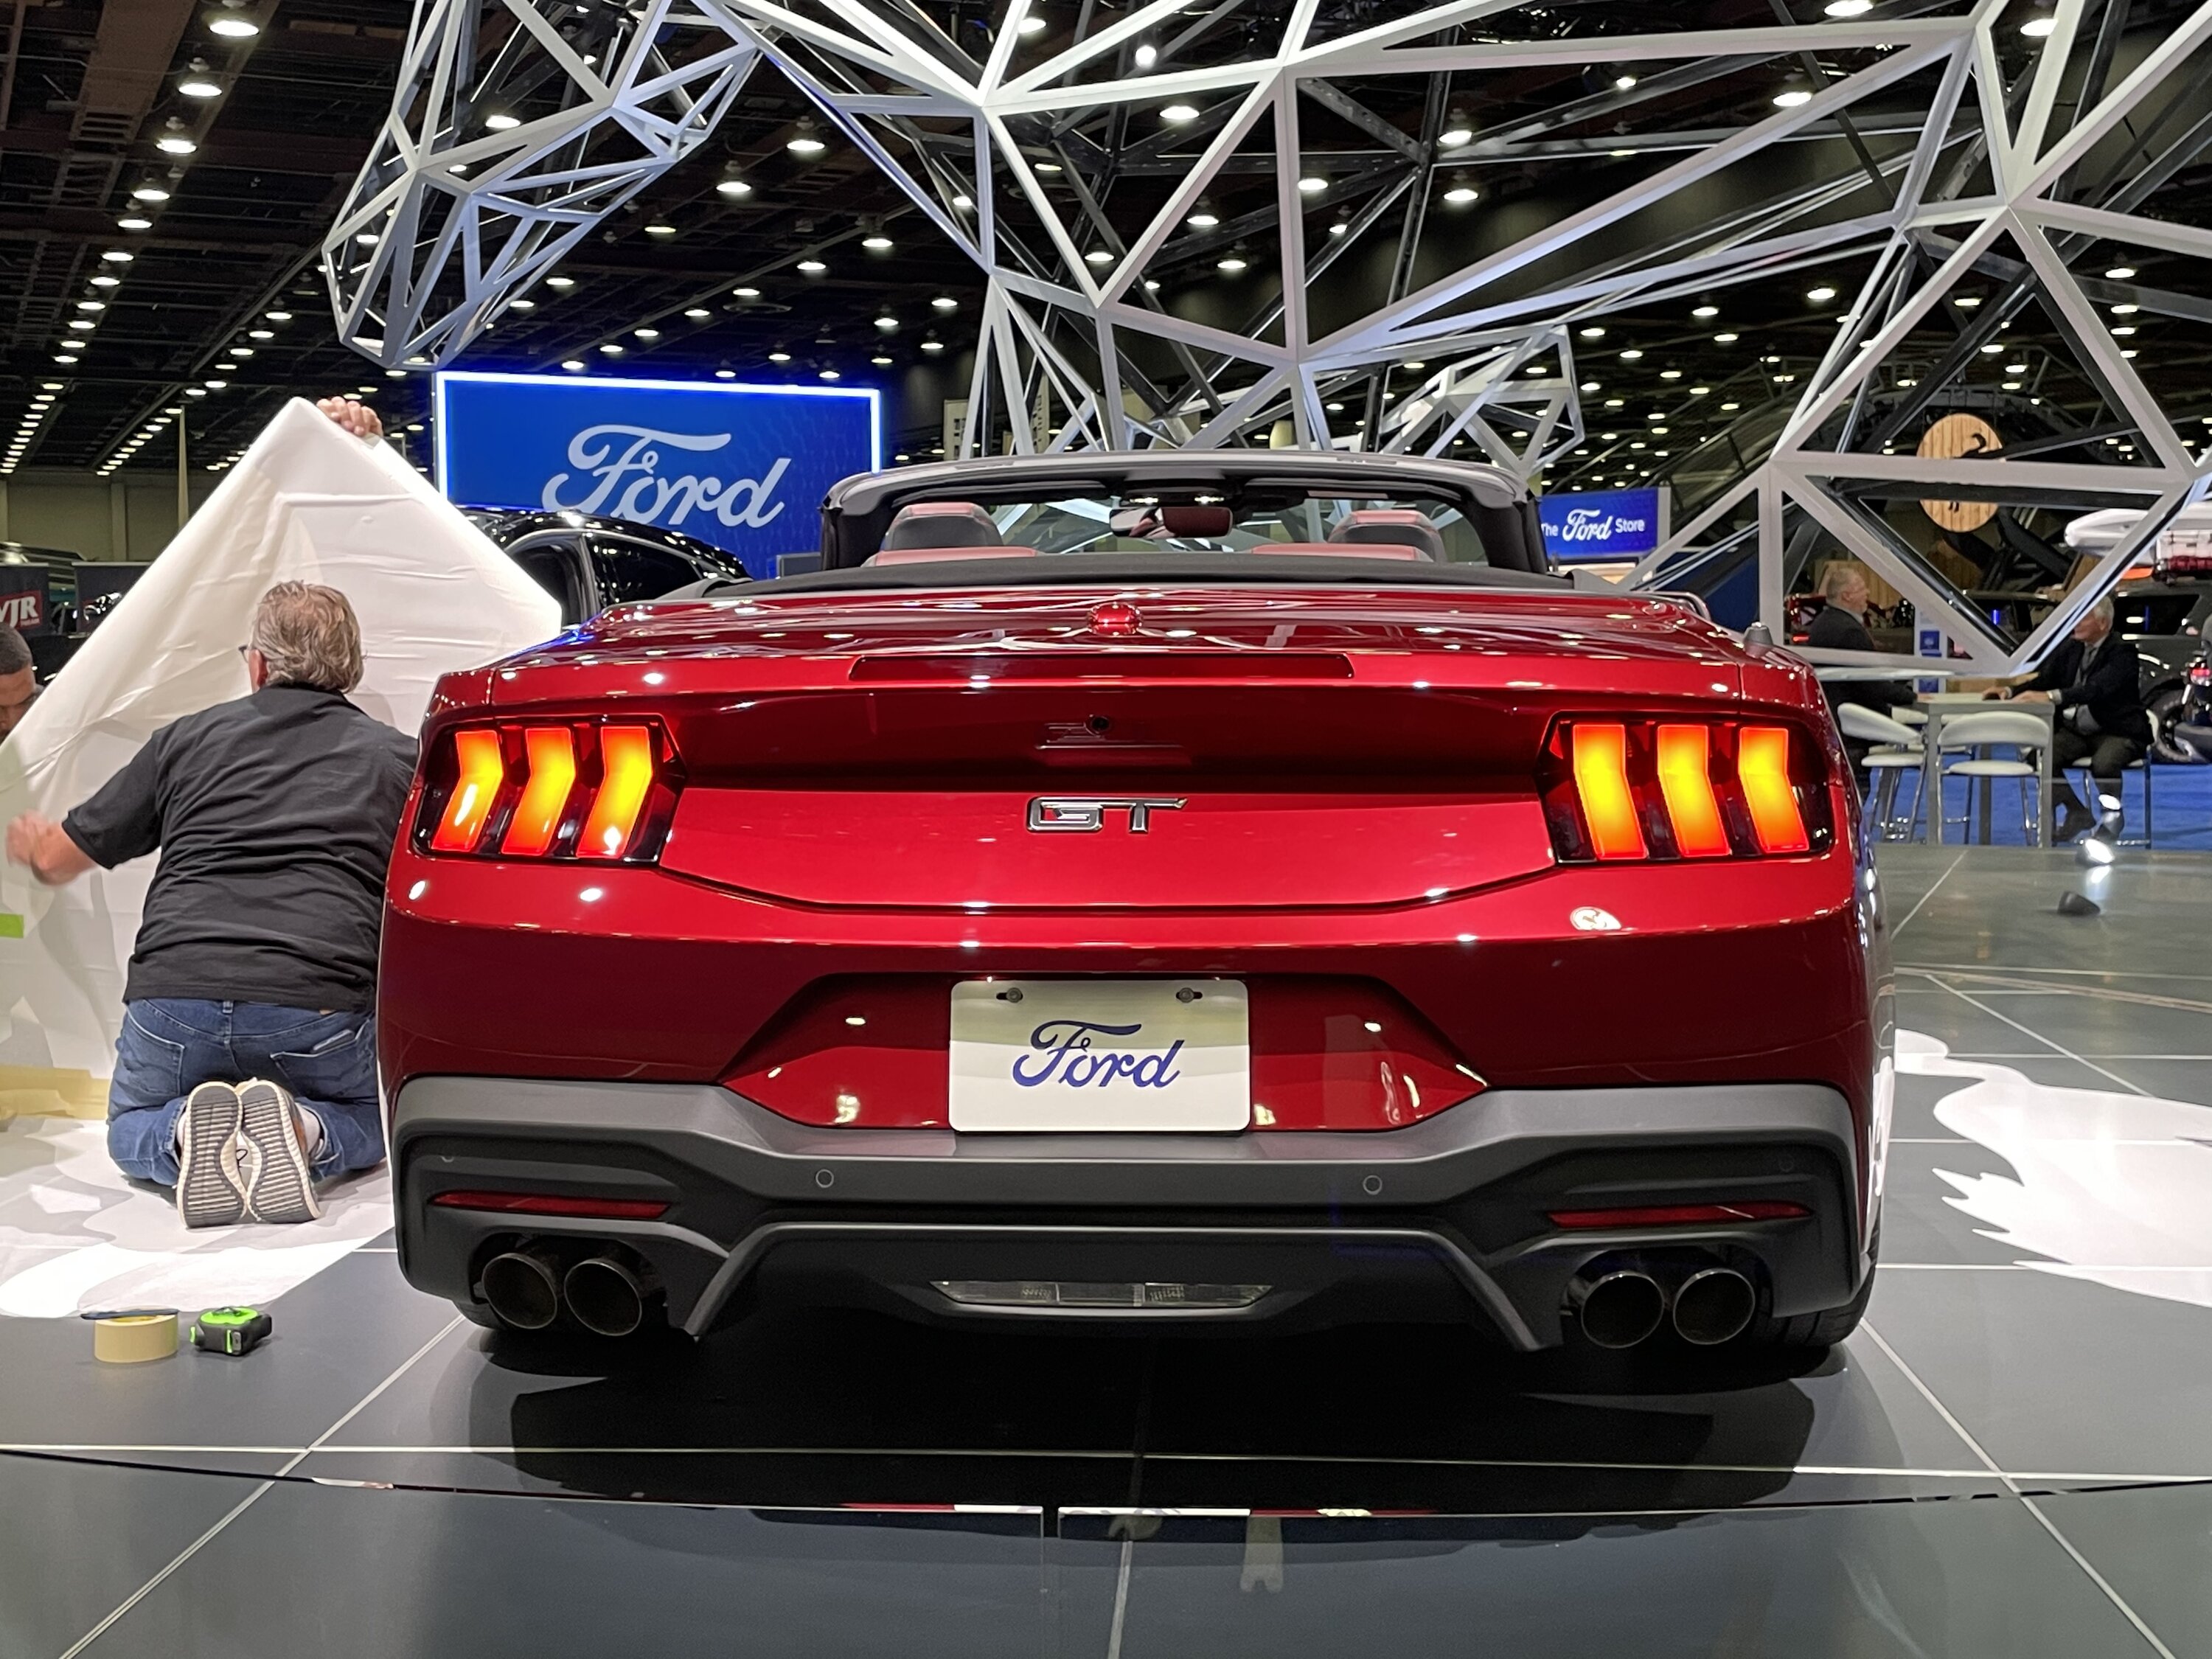 S650 Mustang Do you like the new rear lights on S650 Mustang? b0297003-c980-468a-a113-f2bd87220fac-jpeg-